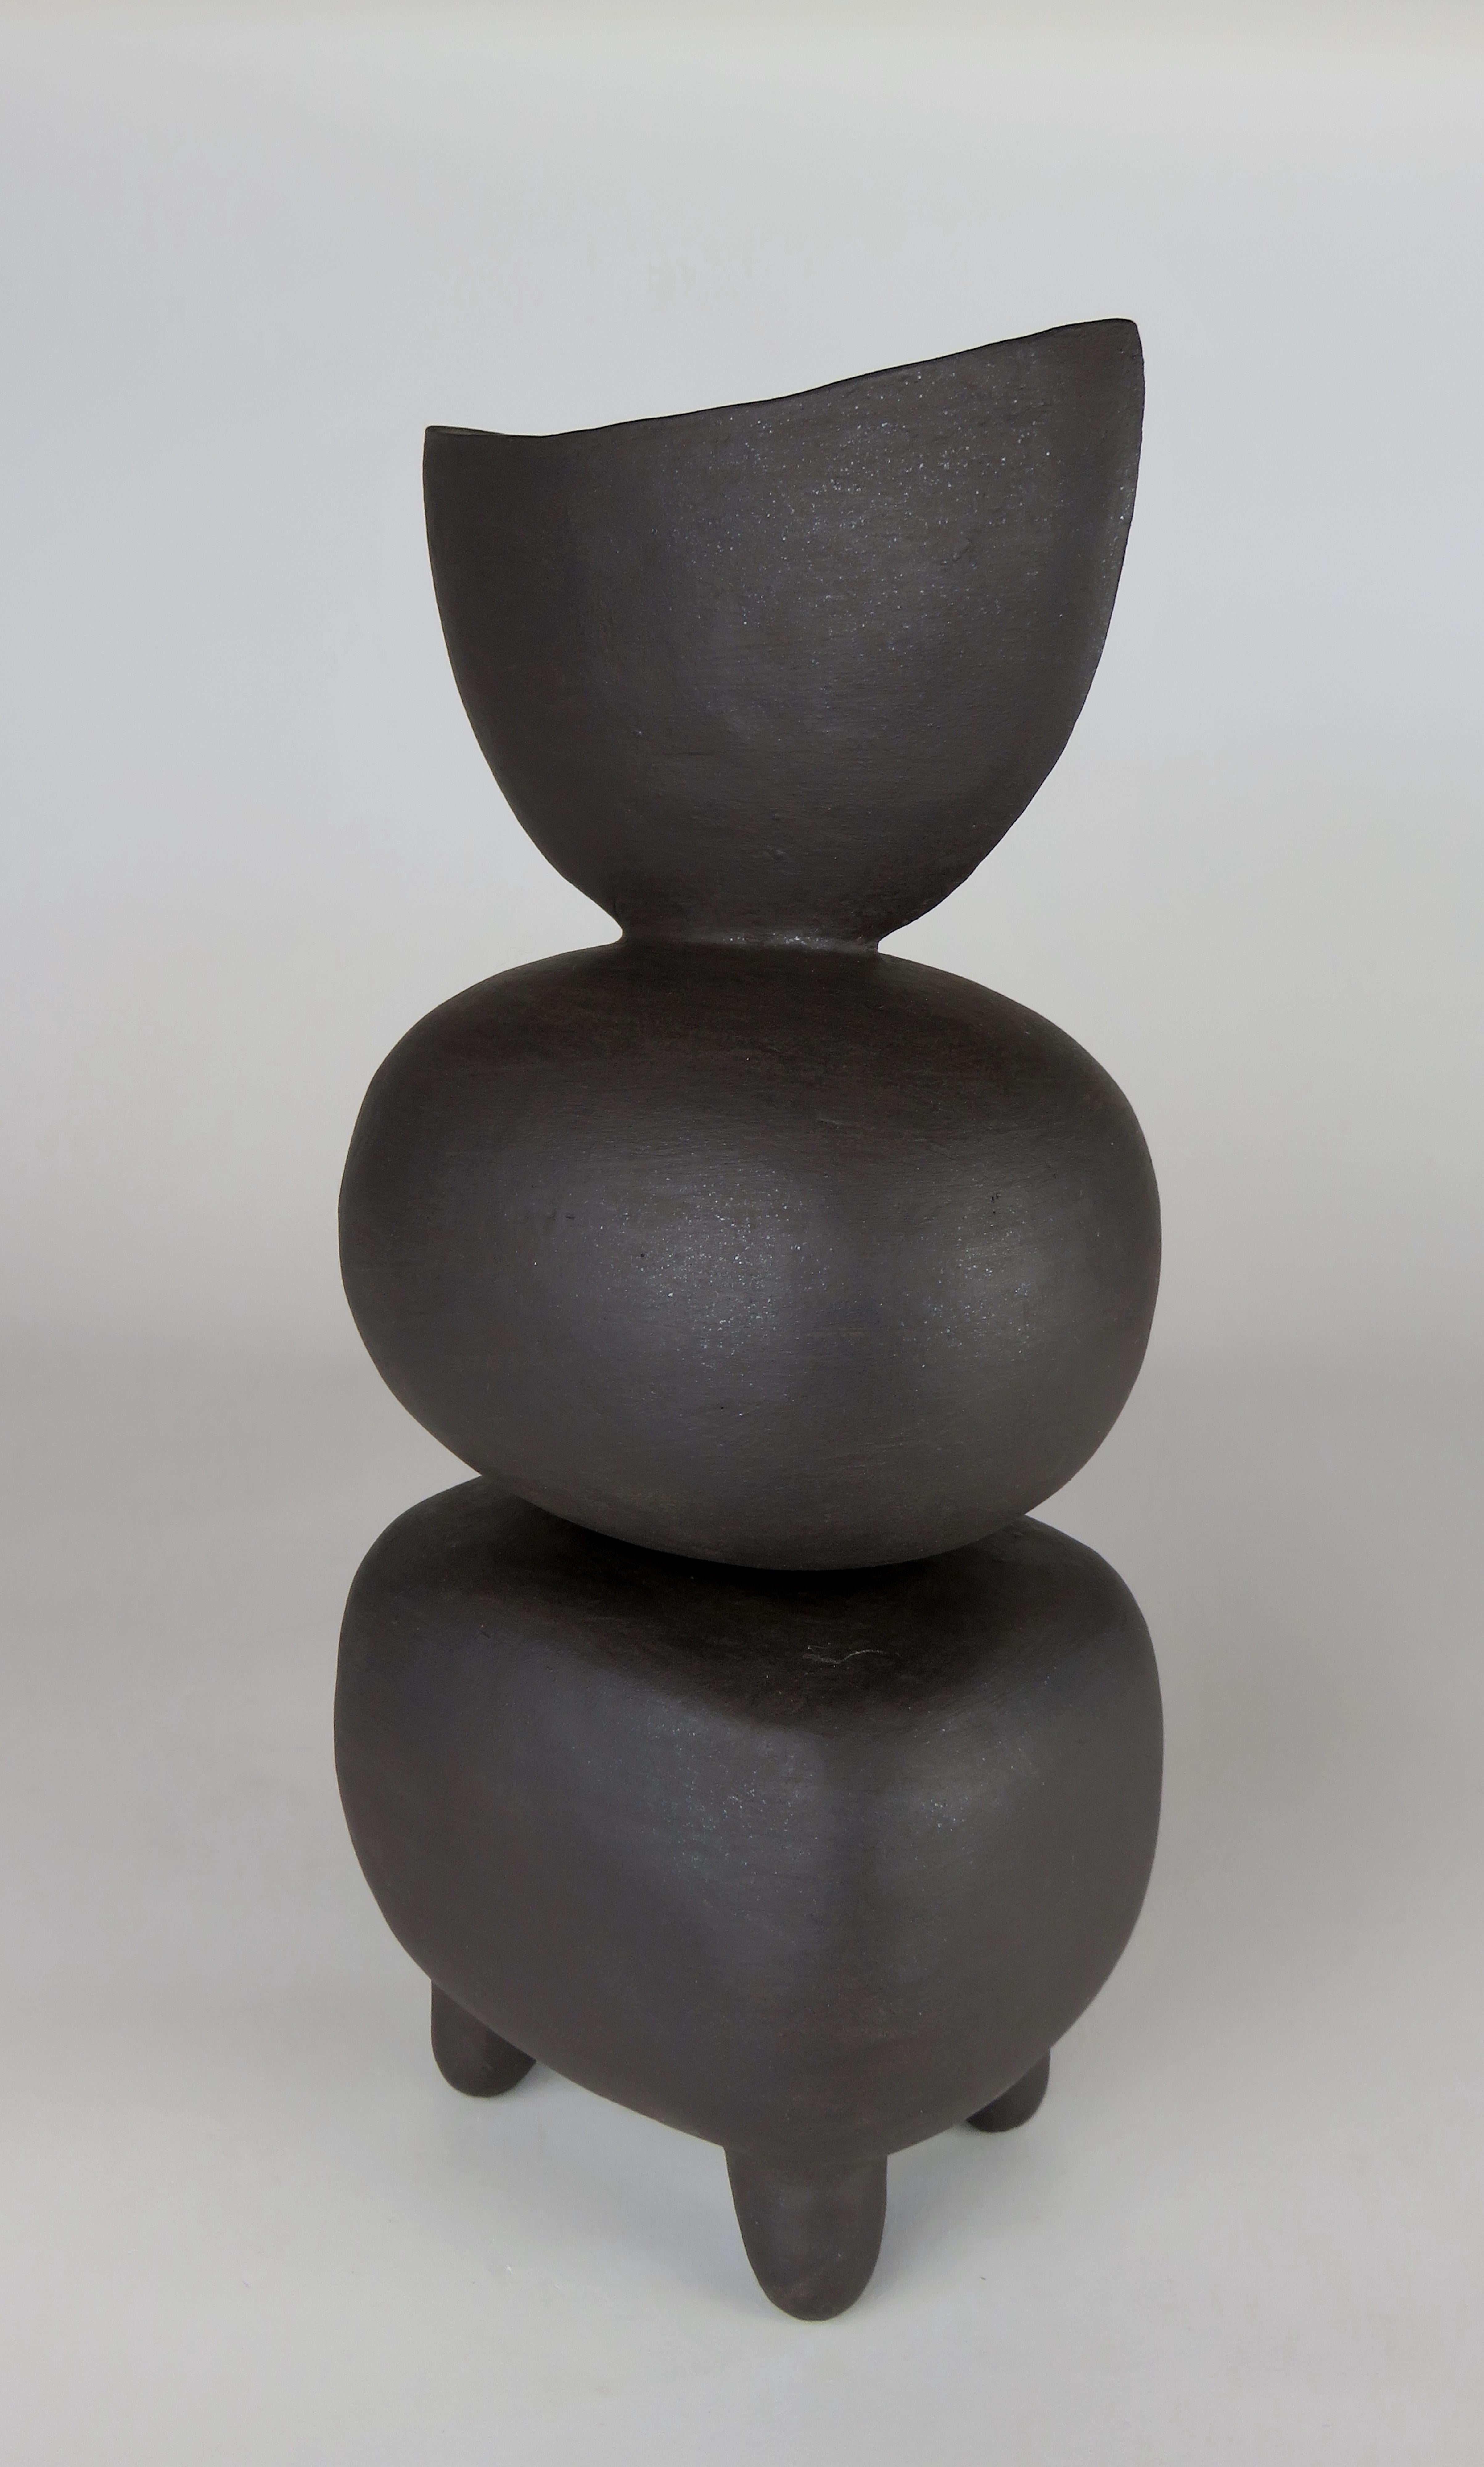 One in a new series of modern Primitive TOTEMS consists of soft round or rectangular forms on small conical feet. The shapes are formed of a solid piece, then hollowed out, stacked and placed on feet. The top of this one is a half moon shape a black